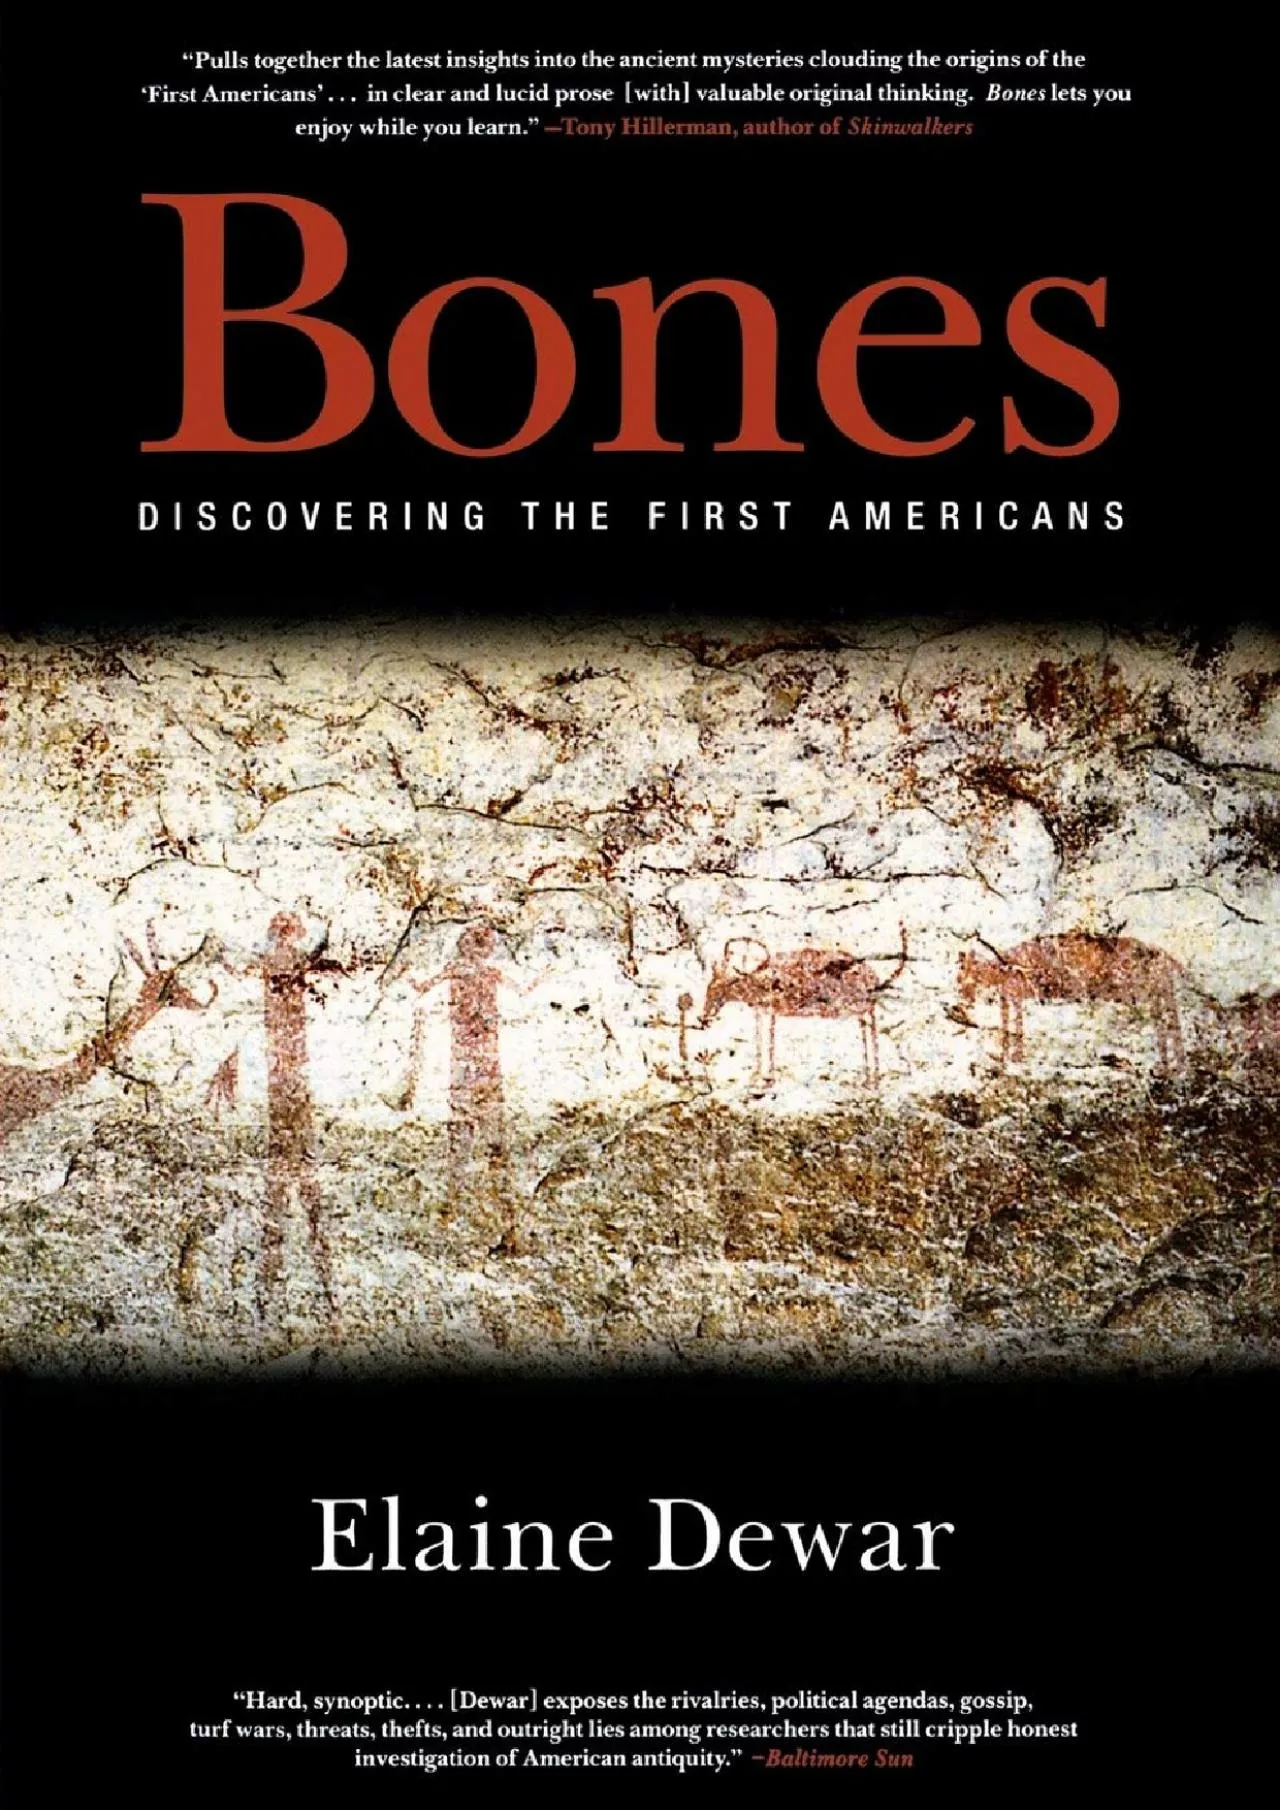 (BOOK)-Bones: Discovering the First Americans